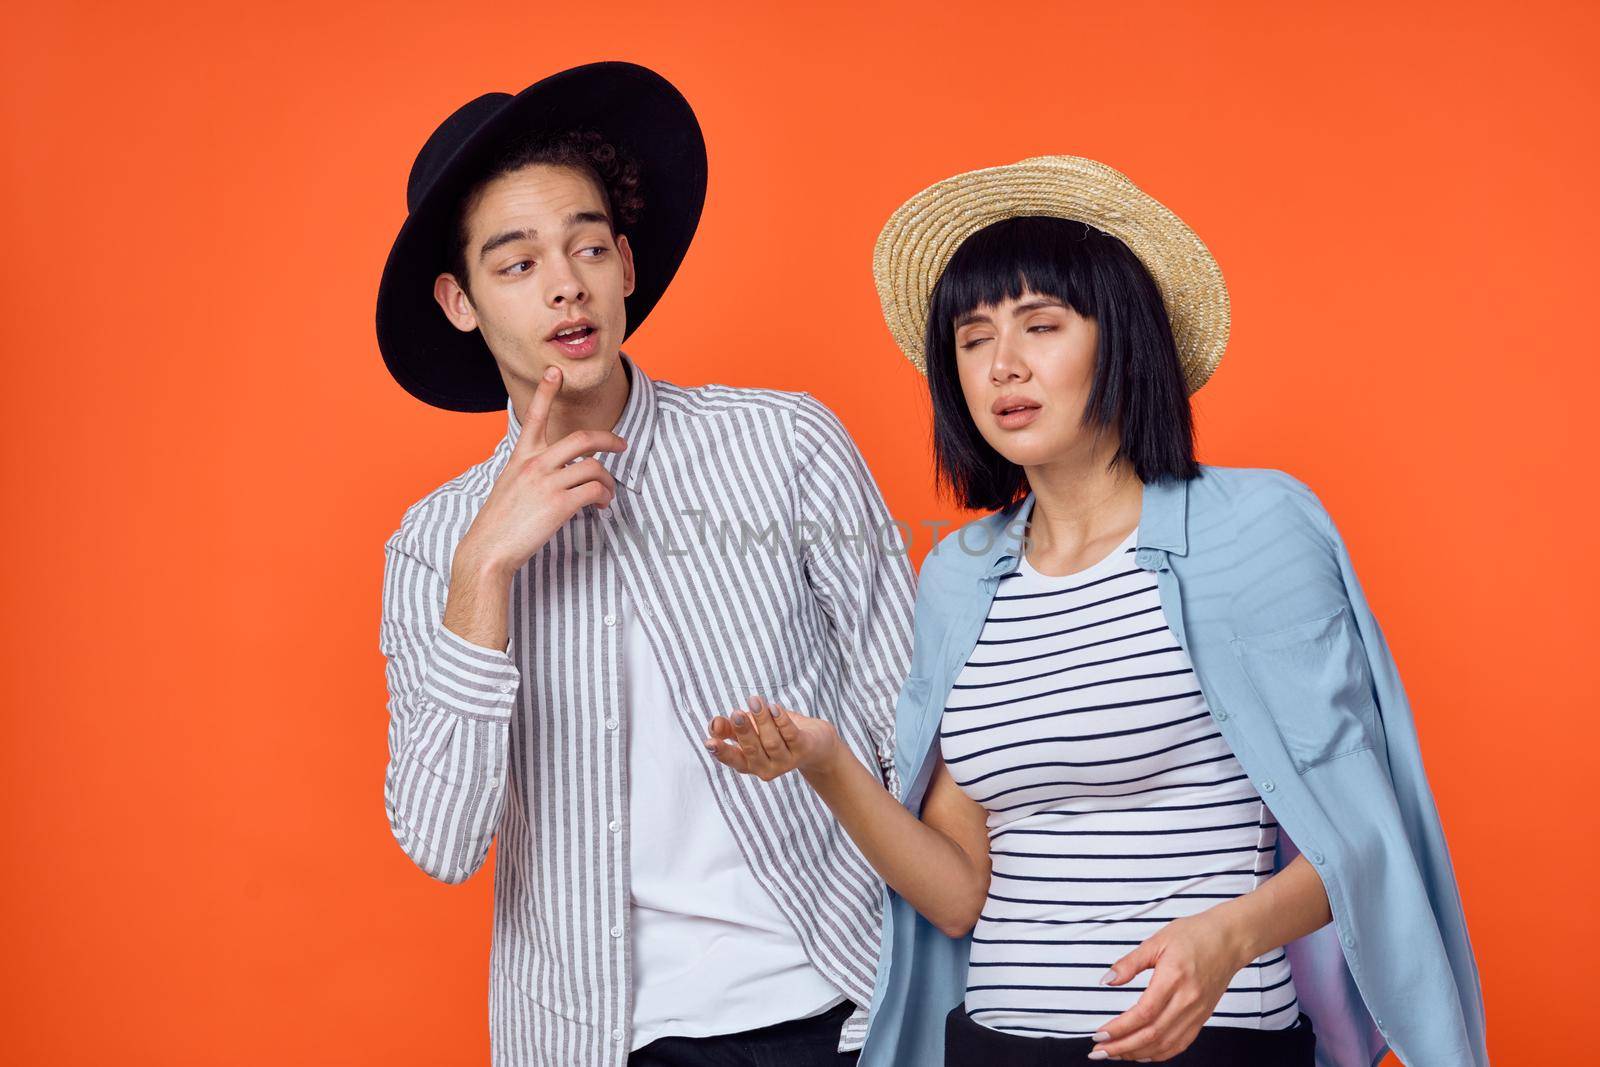 man and woman in hats posing fashion orange background by Vichizh